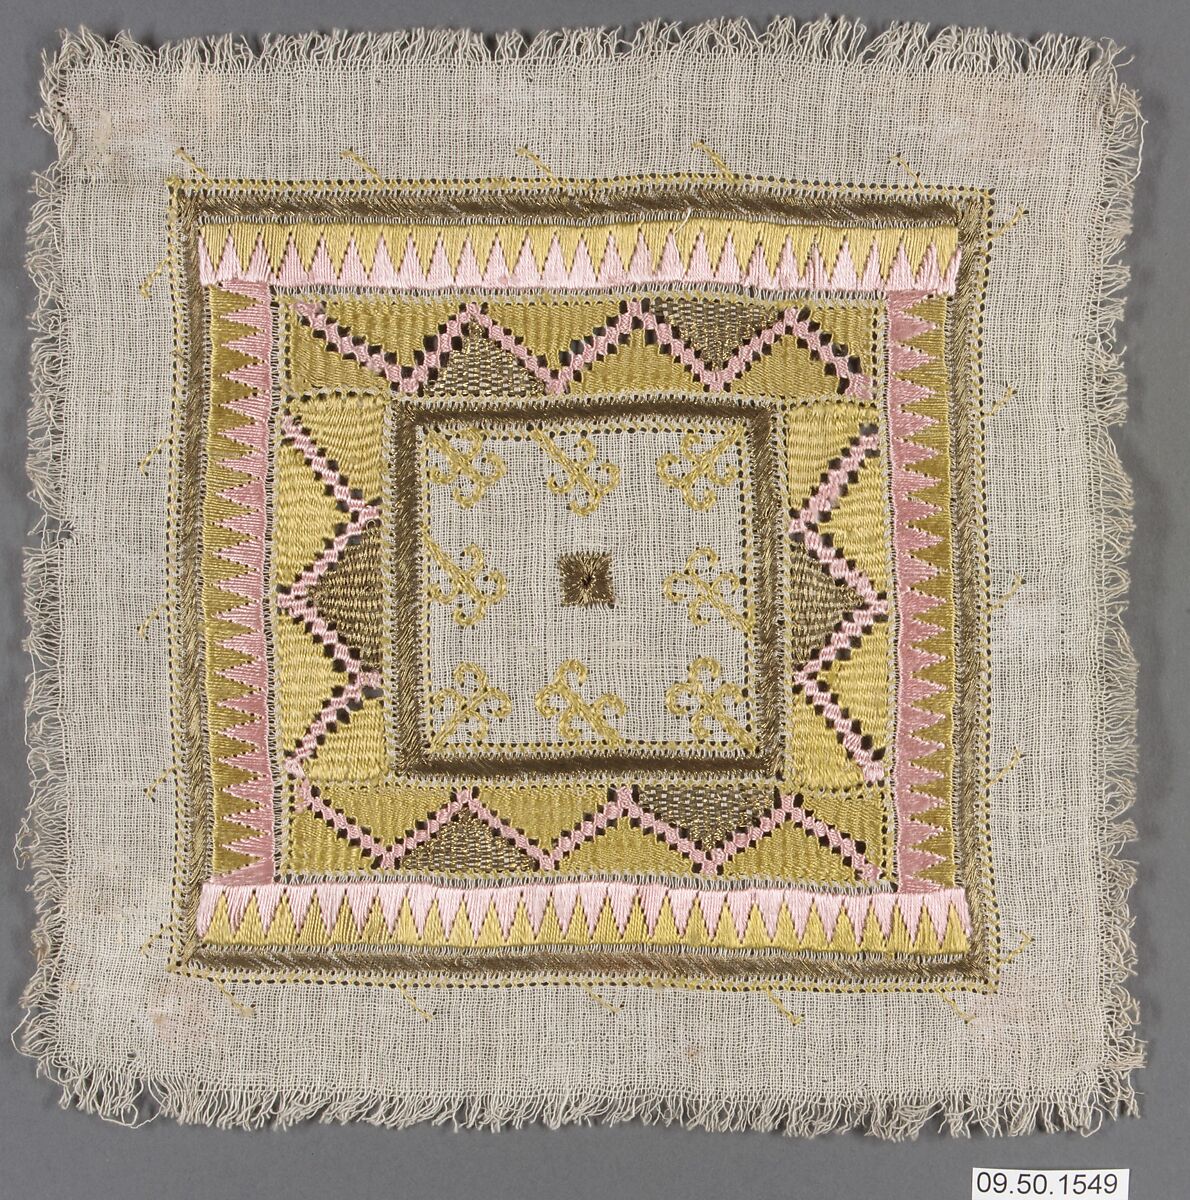 Square, Cotton, silk, metal wrapped thread; plain weave, embroidered 